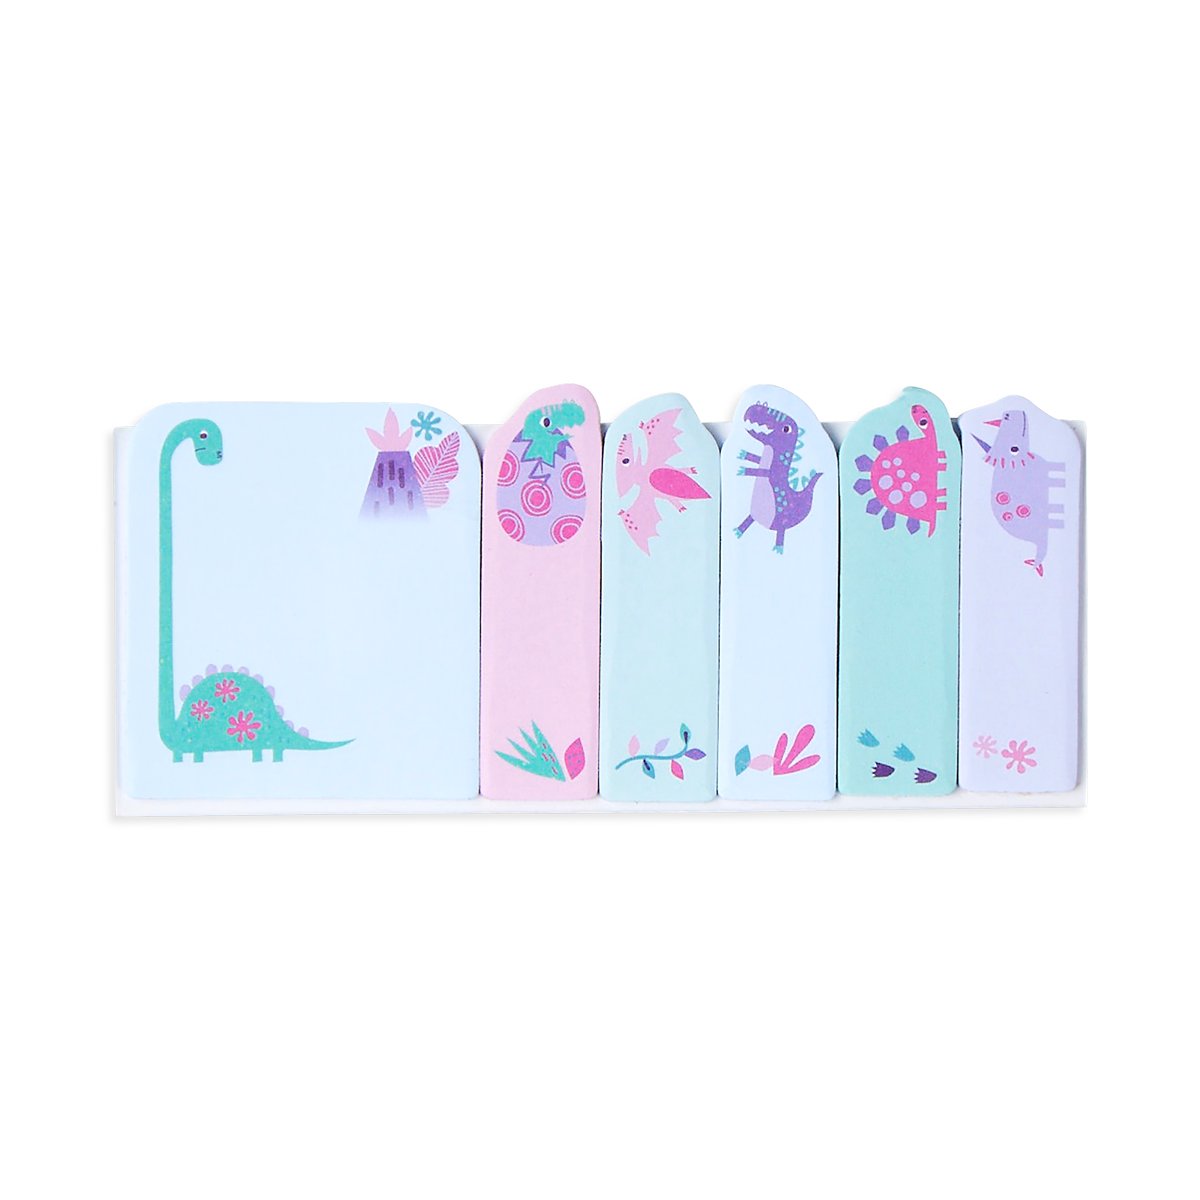 OOLY Note Pals Sticky Tabs - Cute Dinos view of all styles